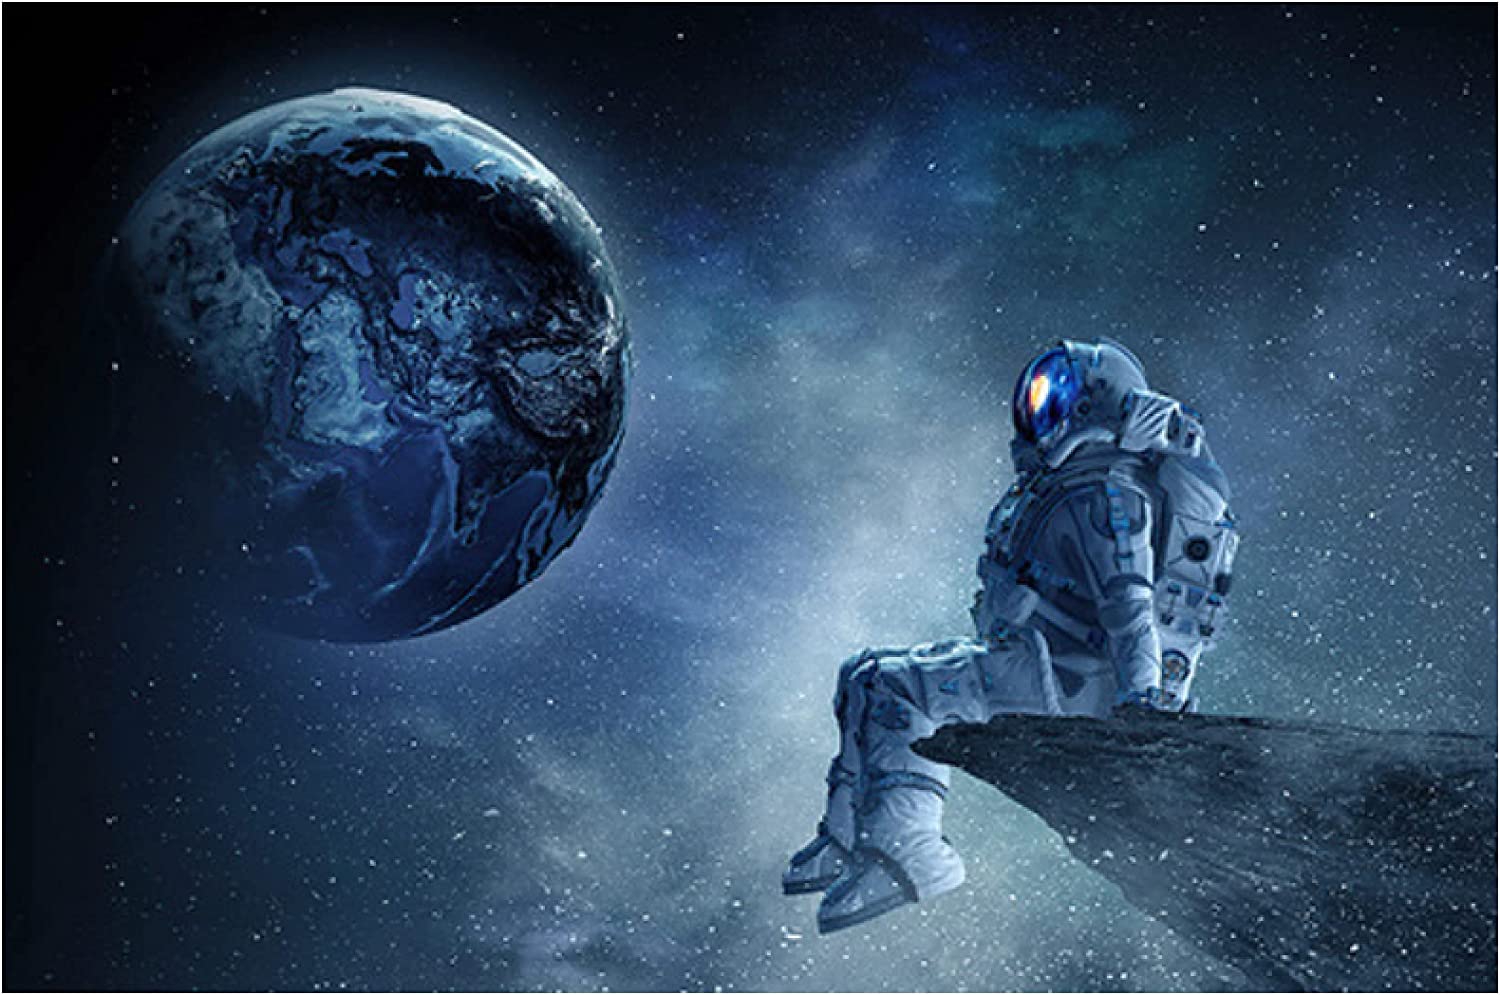 Standing Alone Astronaut Wallpapers